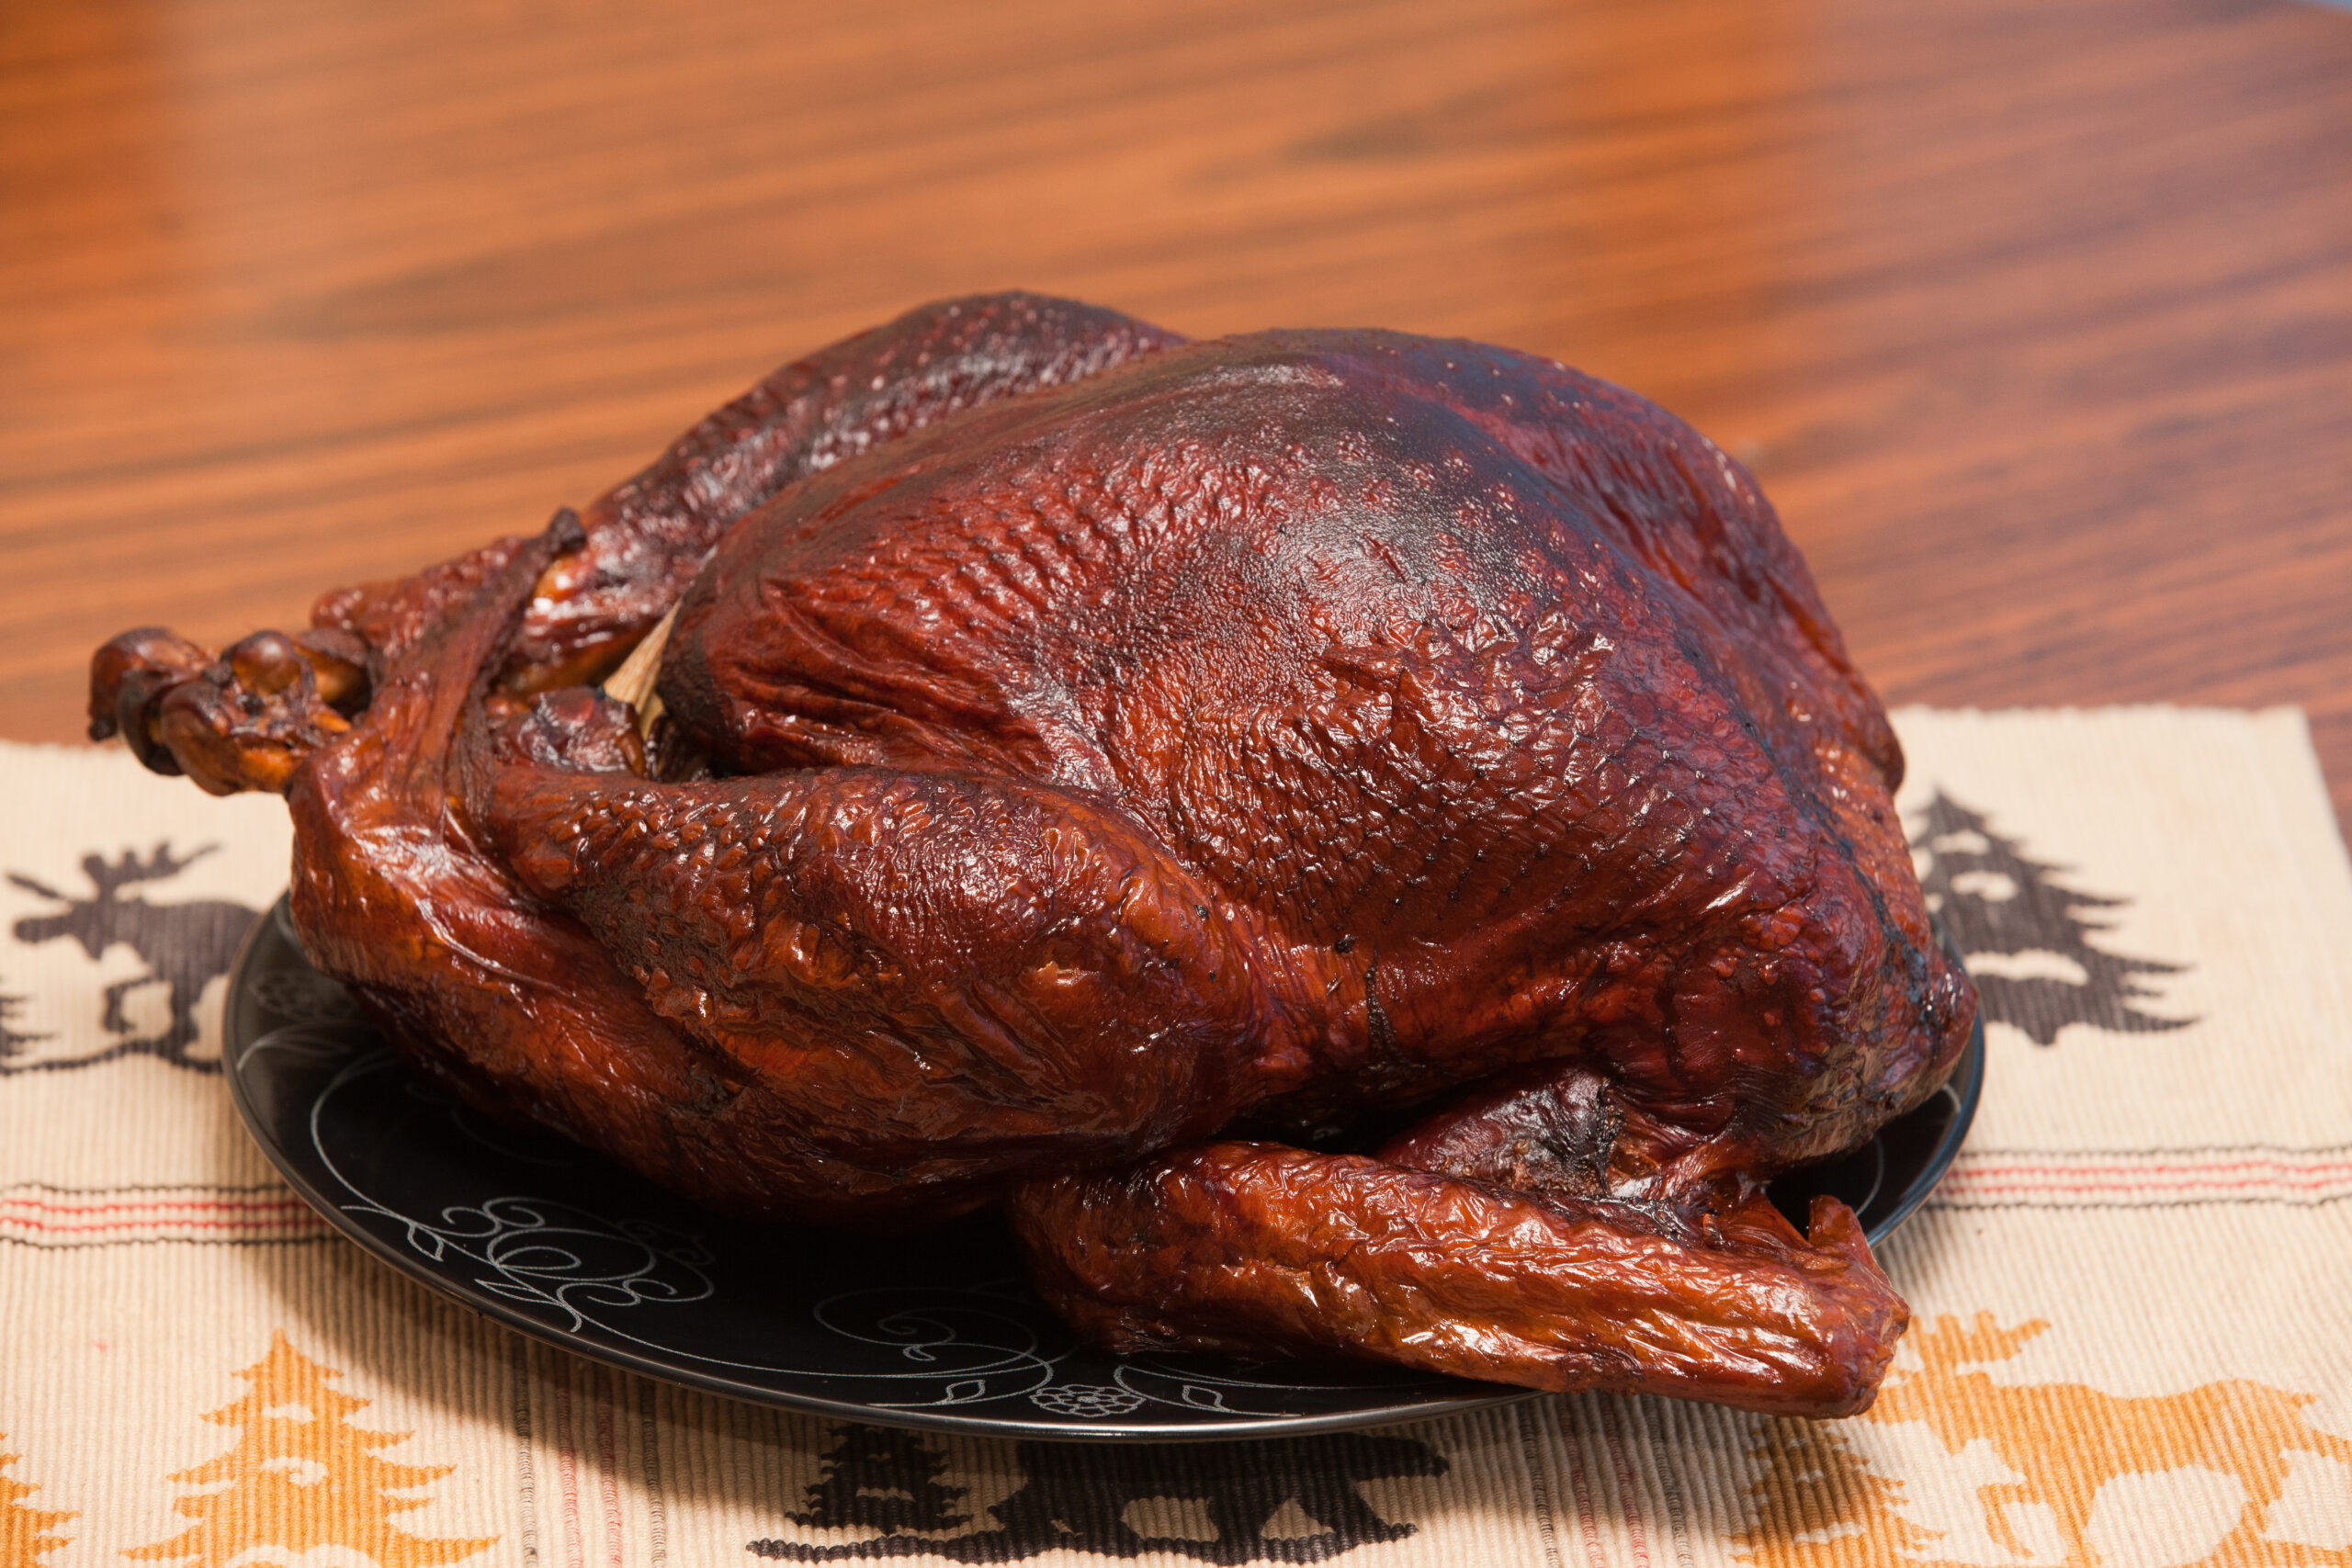 Smoked-Whole-Turkeys-Thanksgiving-DInner-Delivery-Kale-CHef-Service-Scottsdale